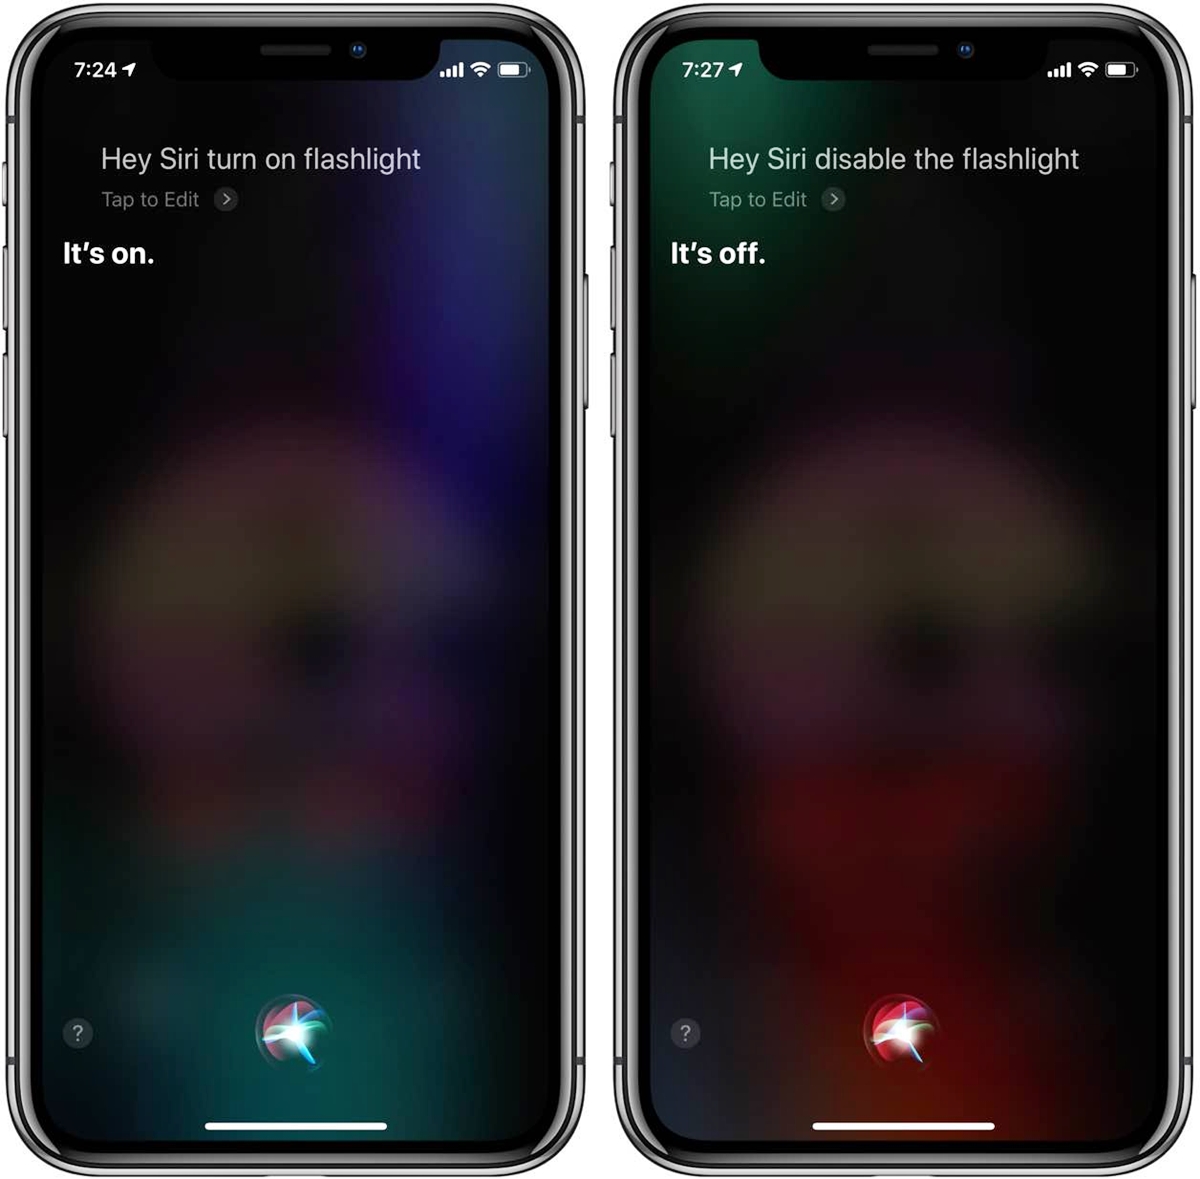 how-to-turn-on-the-flashlight-on-your-iphone-with-hey-siri-in-ios-12